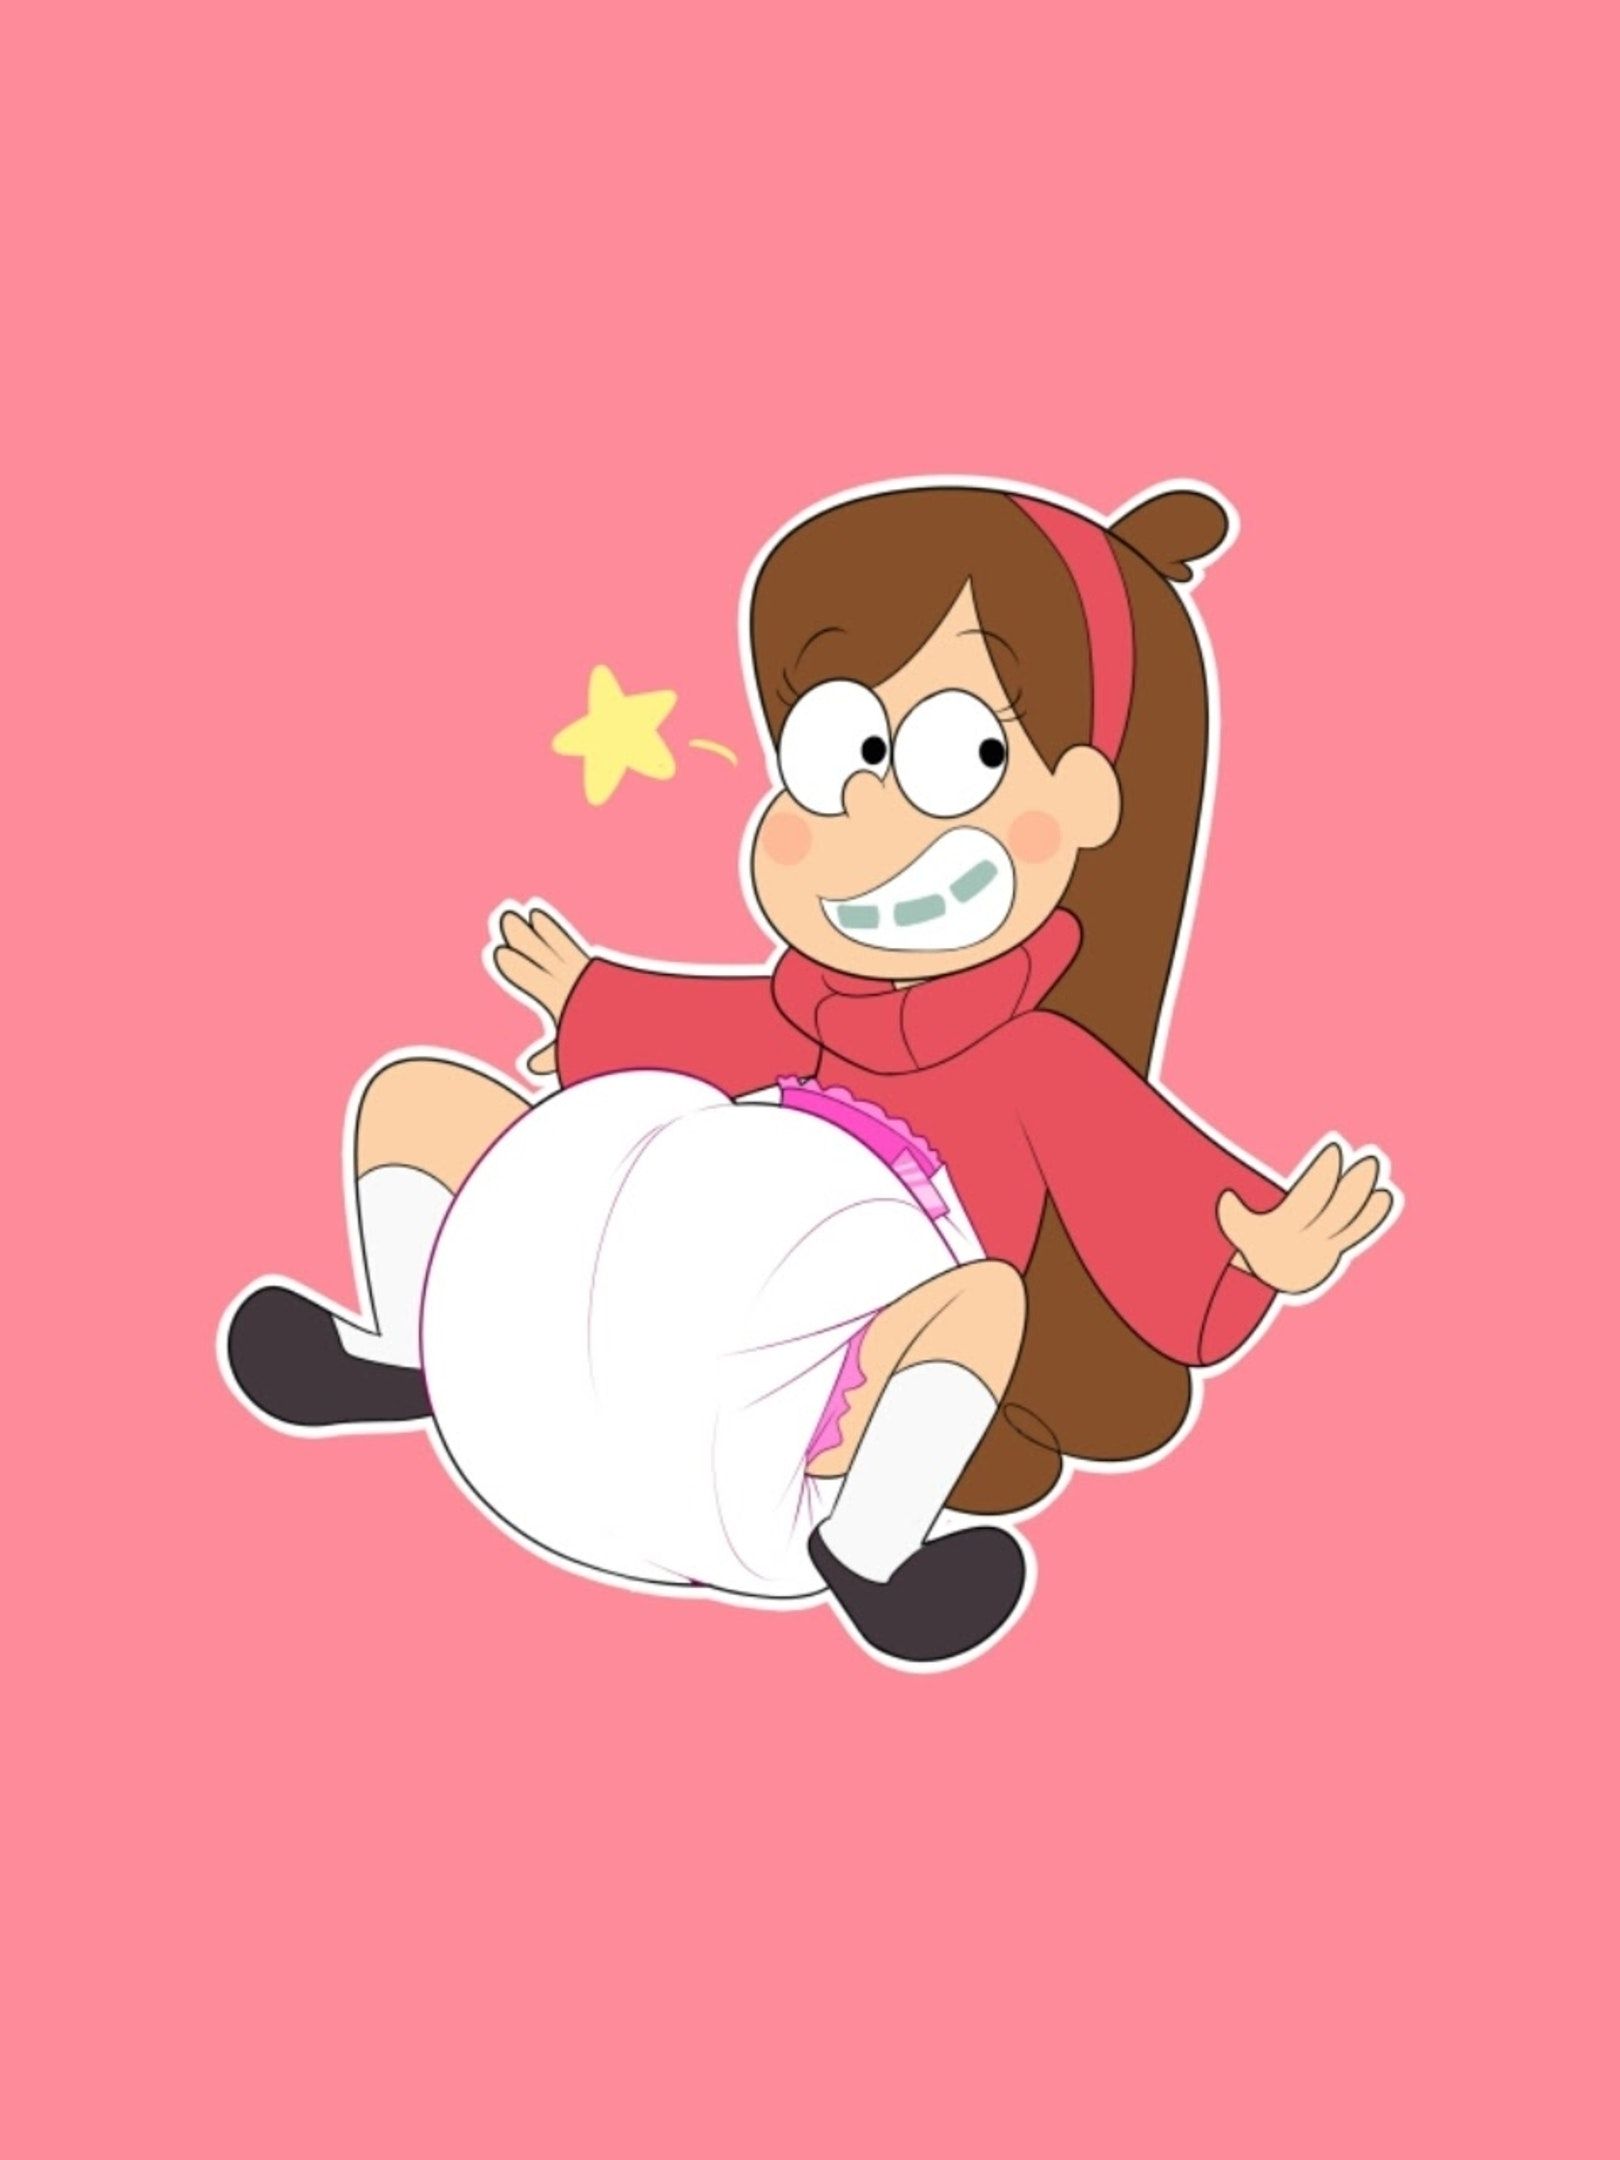 A padded Mabel Pines wallpaper (in 4K!) I made using a drawing by Kurika on Tumblr